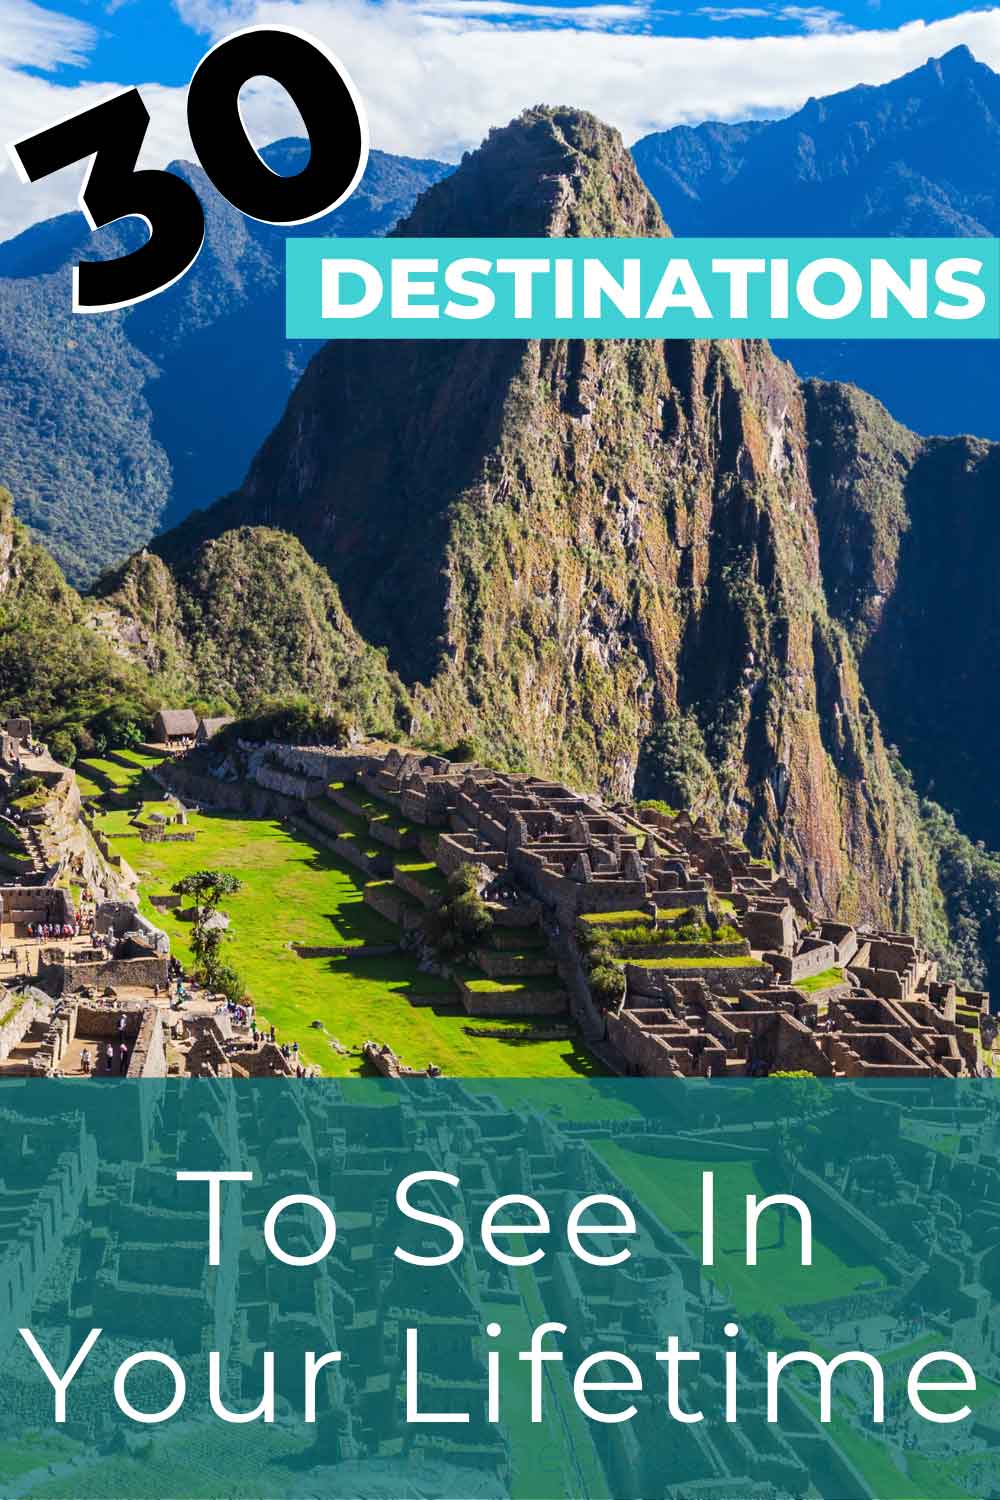 30 Destinations to see in your lifetime